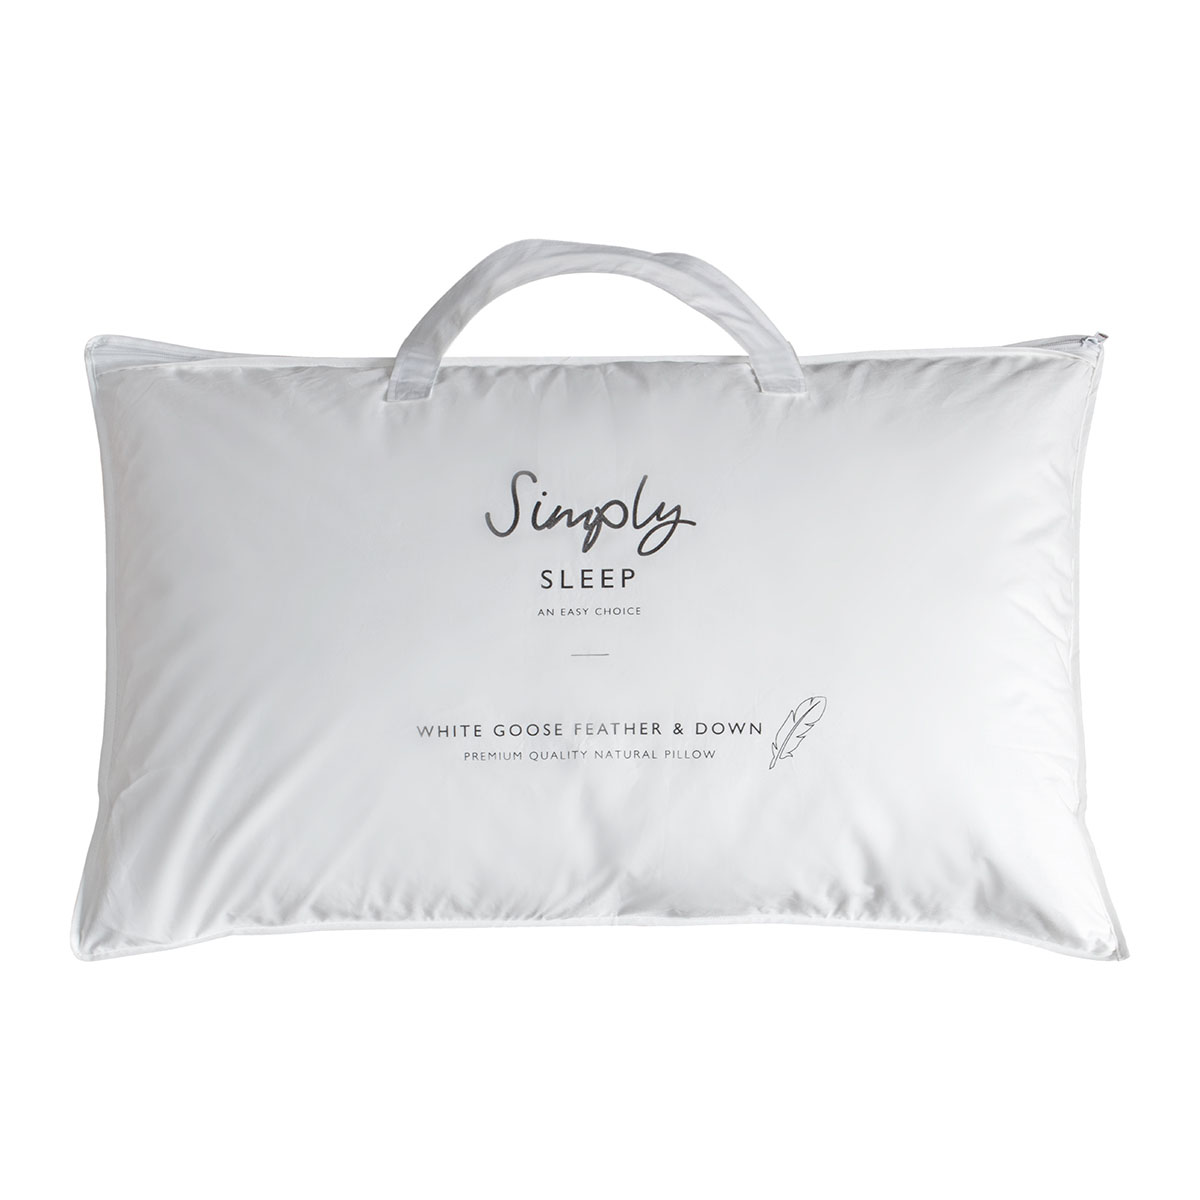 SS White Goose Feather & Down Pillow 480x740mm